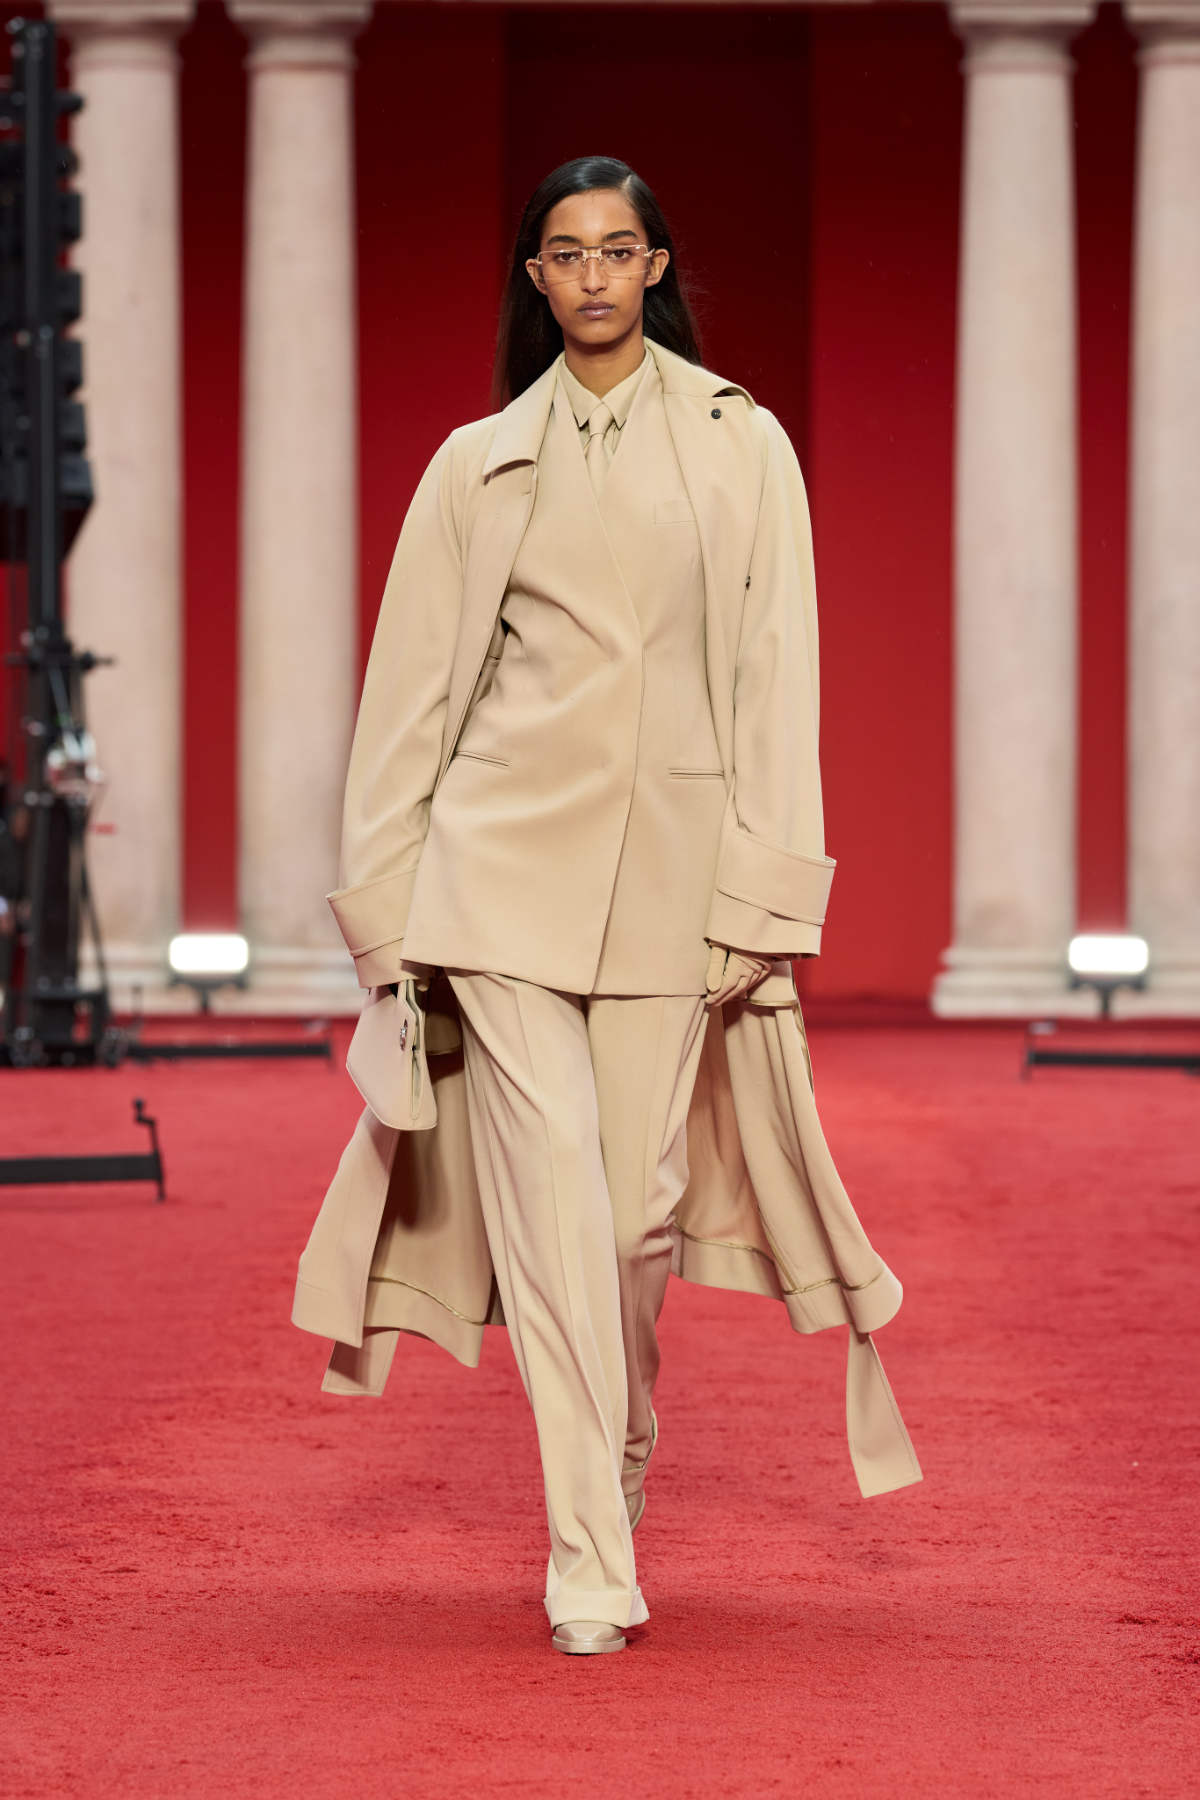 Ferragamo Presents Its New Spring-Summer 2023 Collection